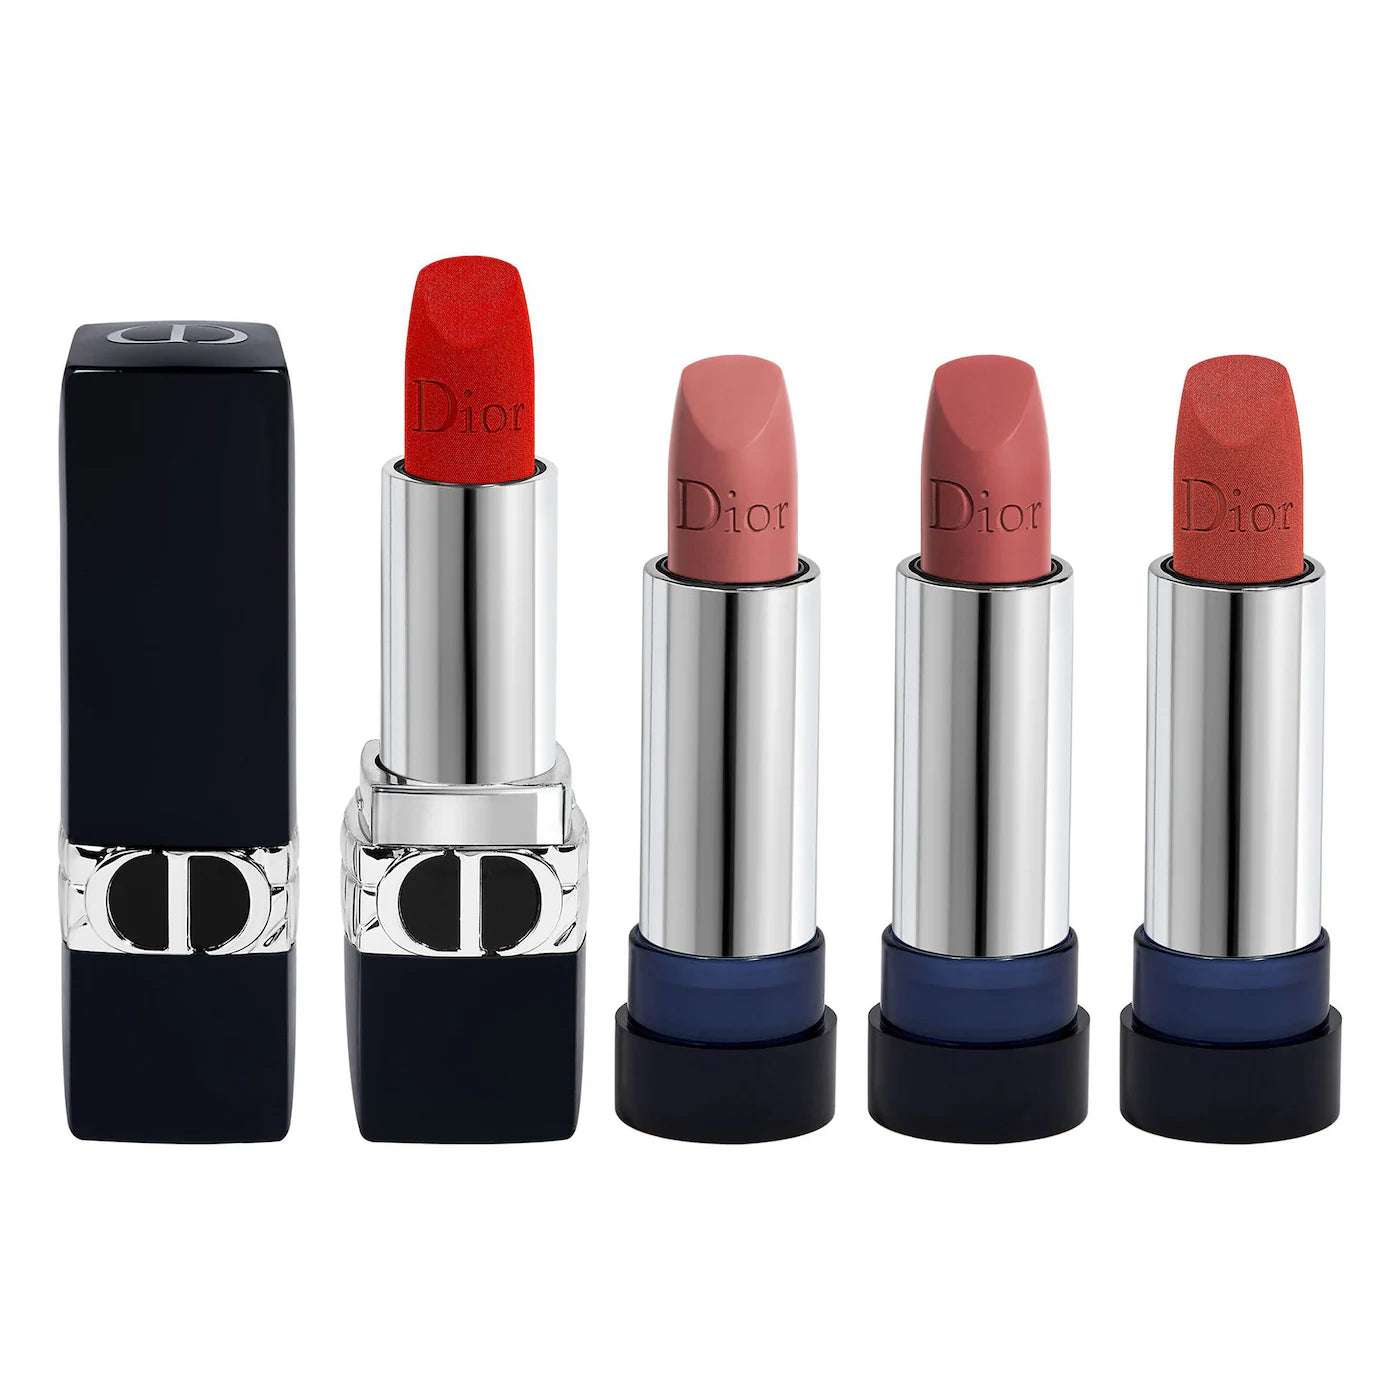 Dior Rouge Dior Minaudière Clutch: Lipstick Collection Case -  Limited Edition